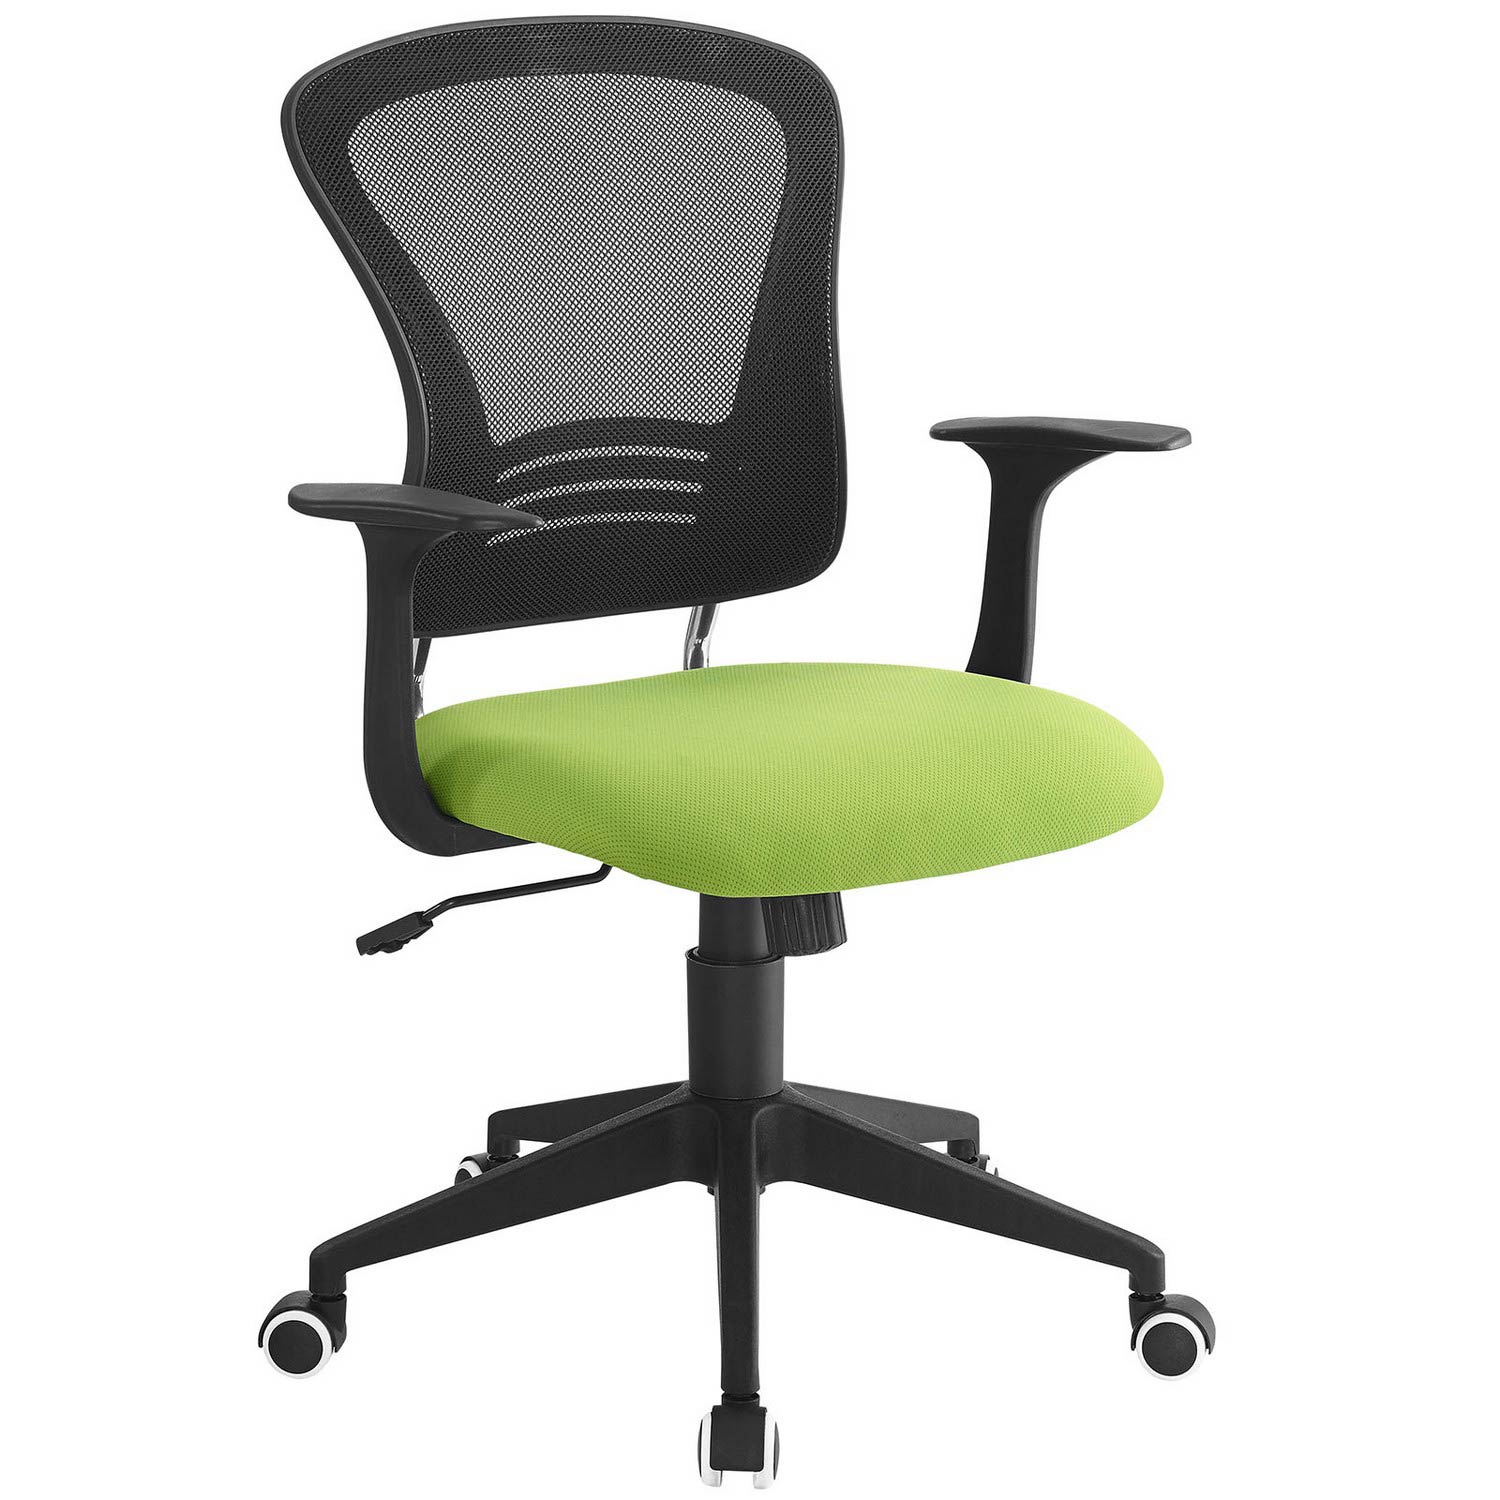 Modway Poise Office Chair - Green